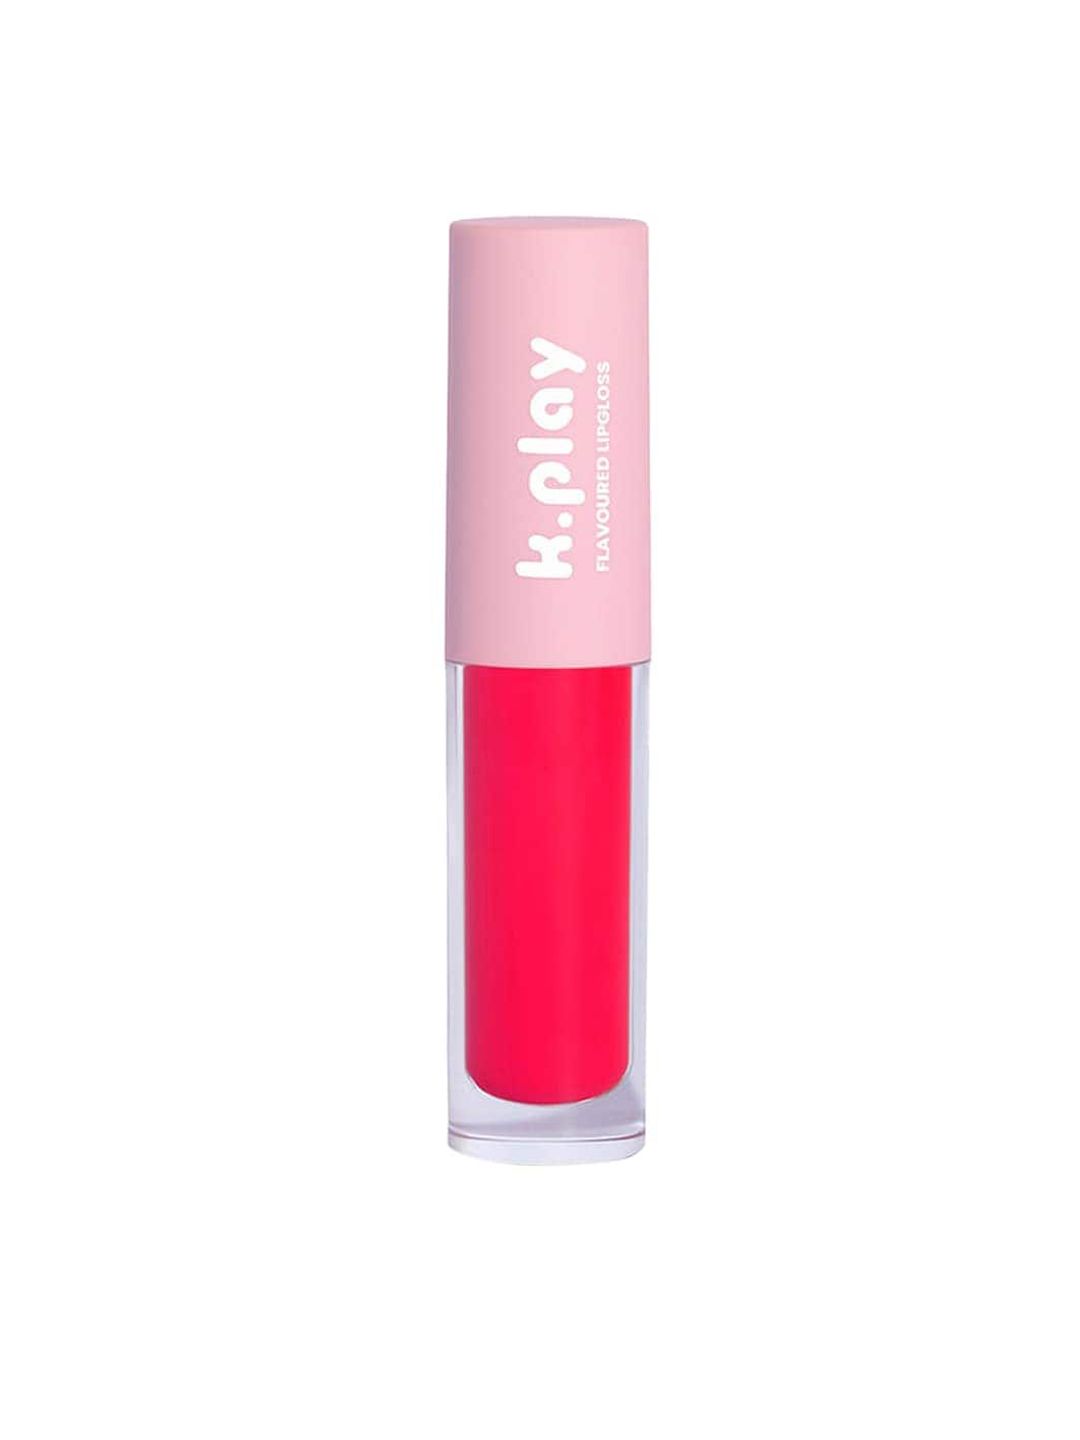 MyGlamm K.Play Flavoured Lipgloss 4.5 ml - Raspberry Punch Price in India